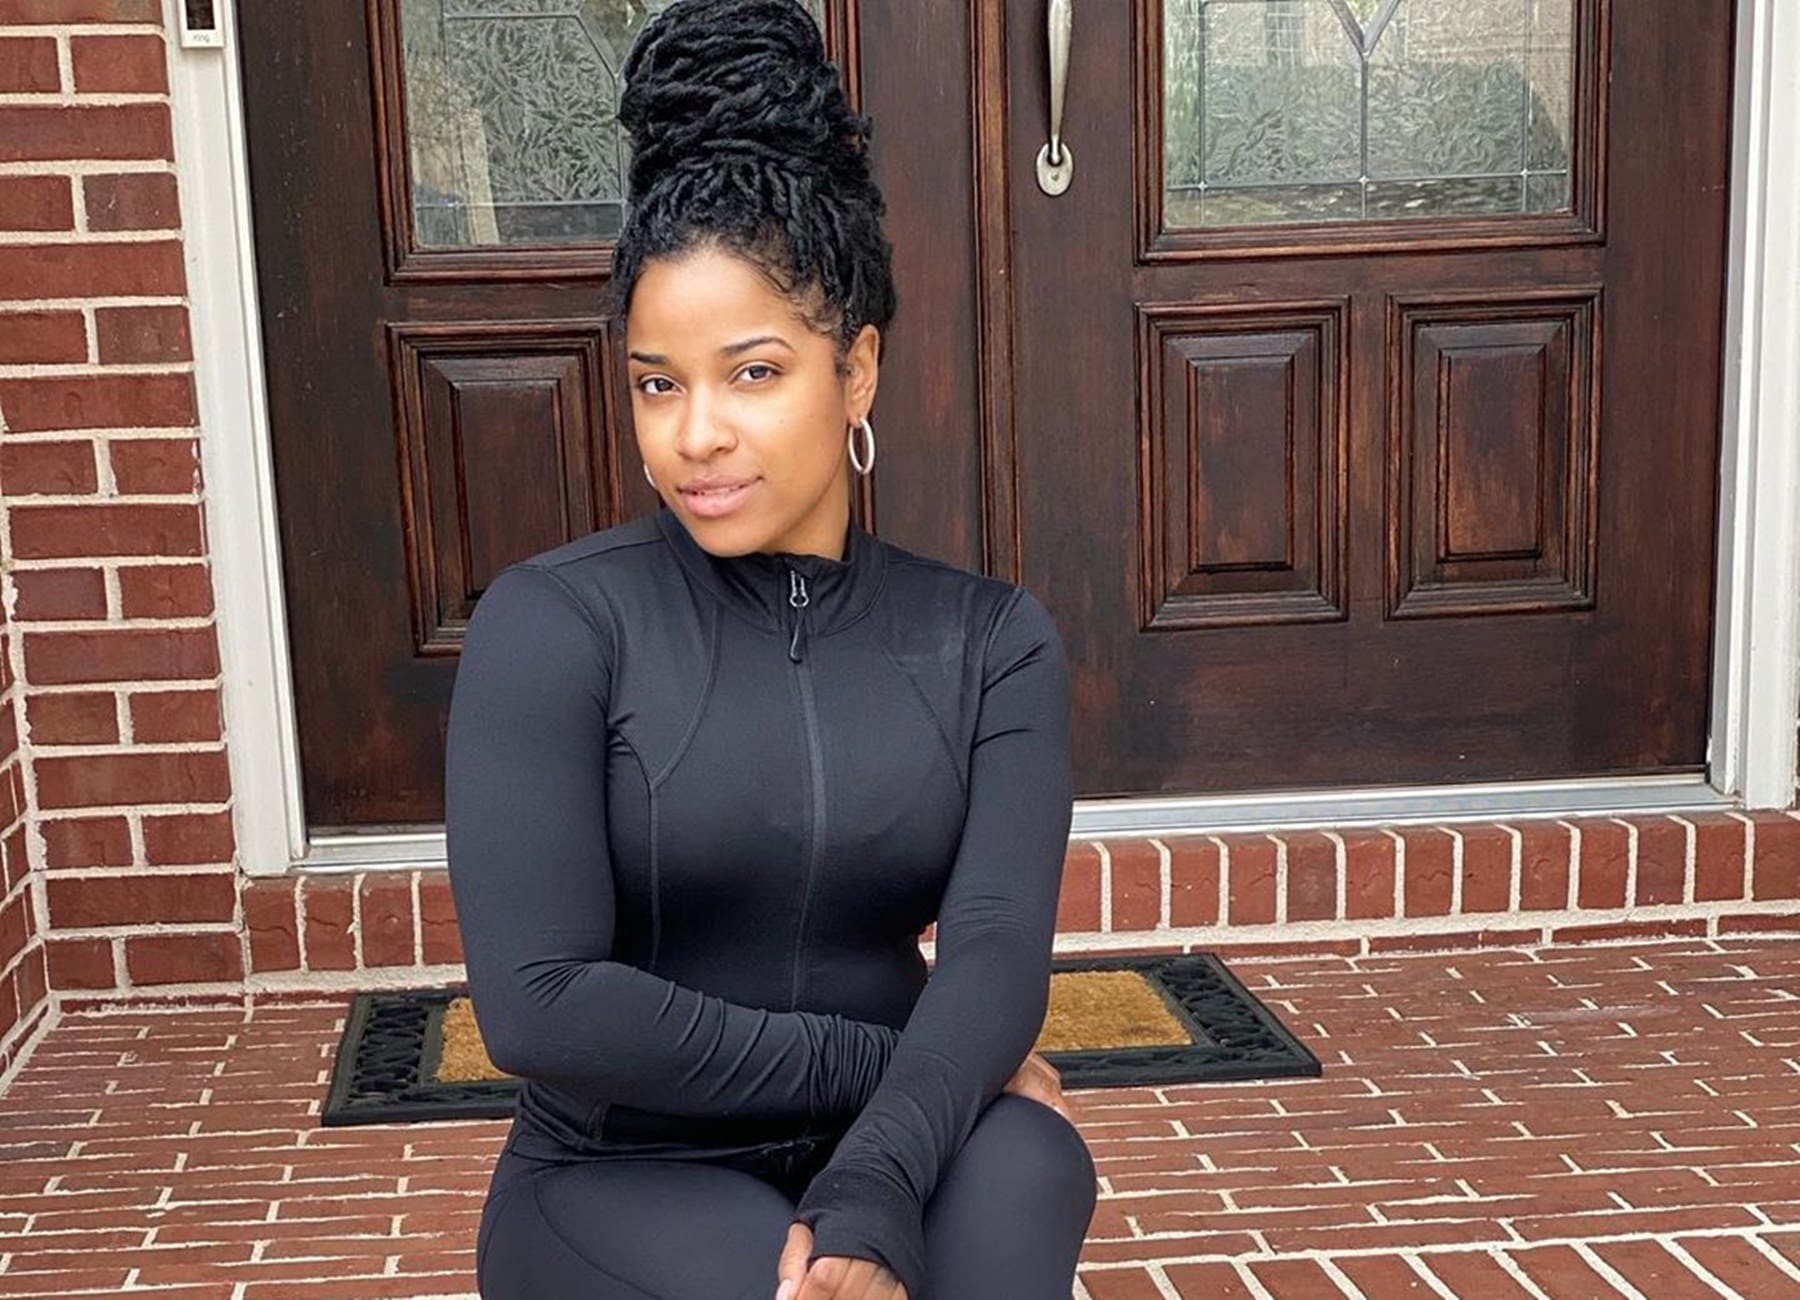 Toya Johnson Flaunts Her Exercise Routine And Fans Understand Why She Looks So Great